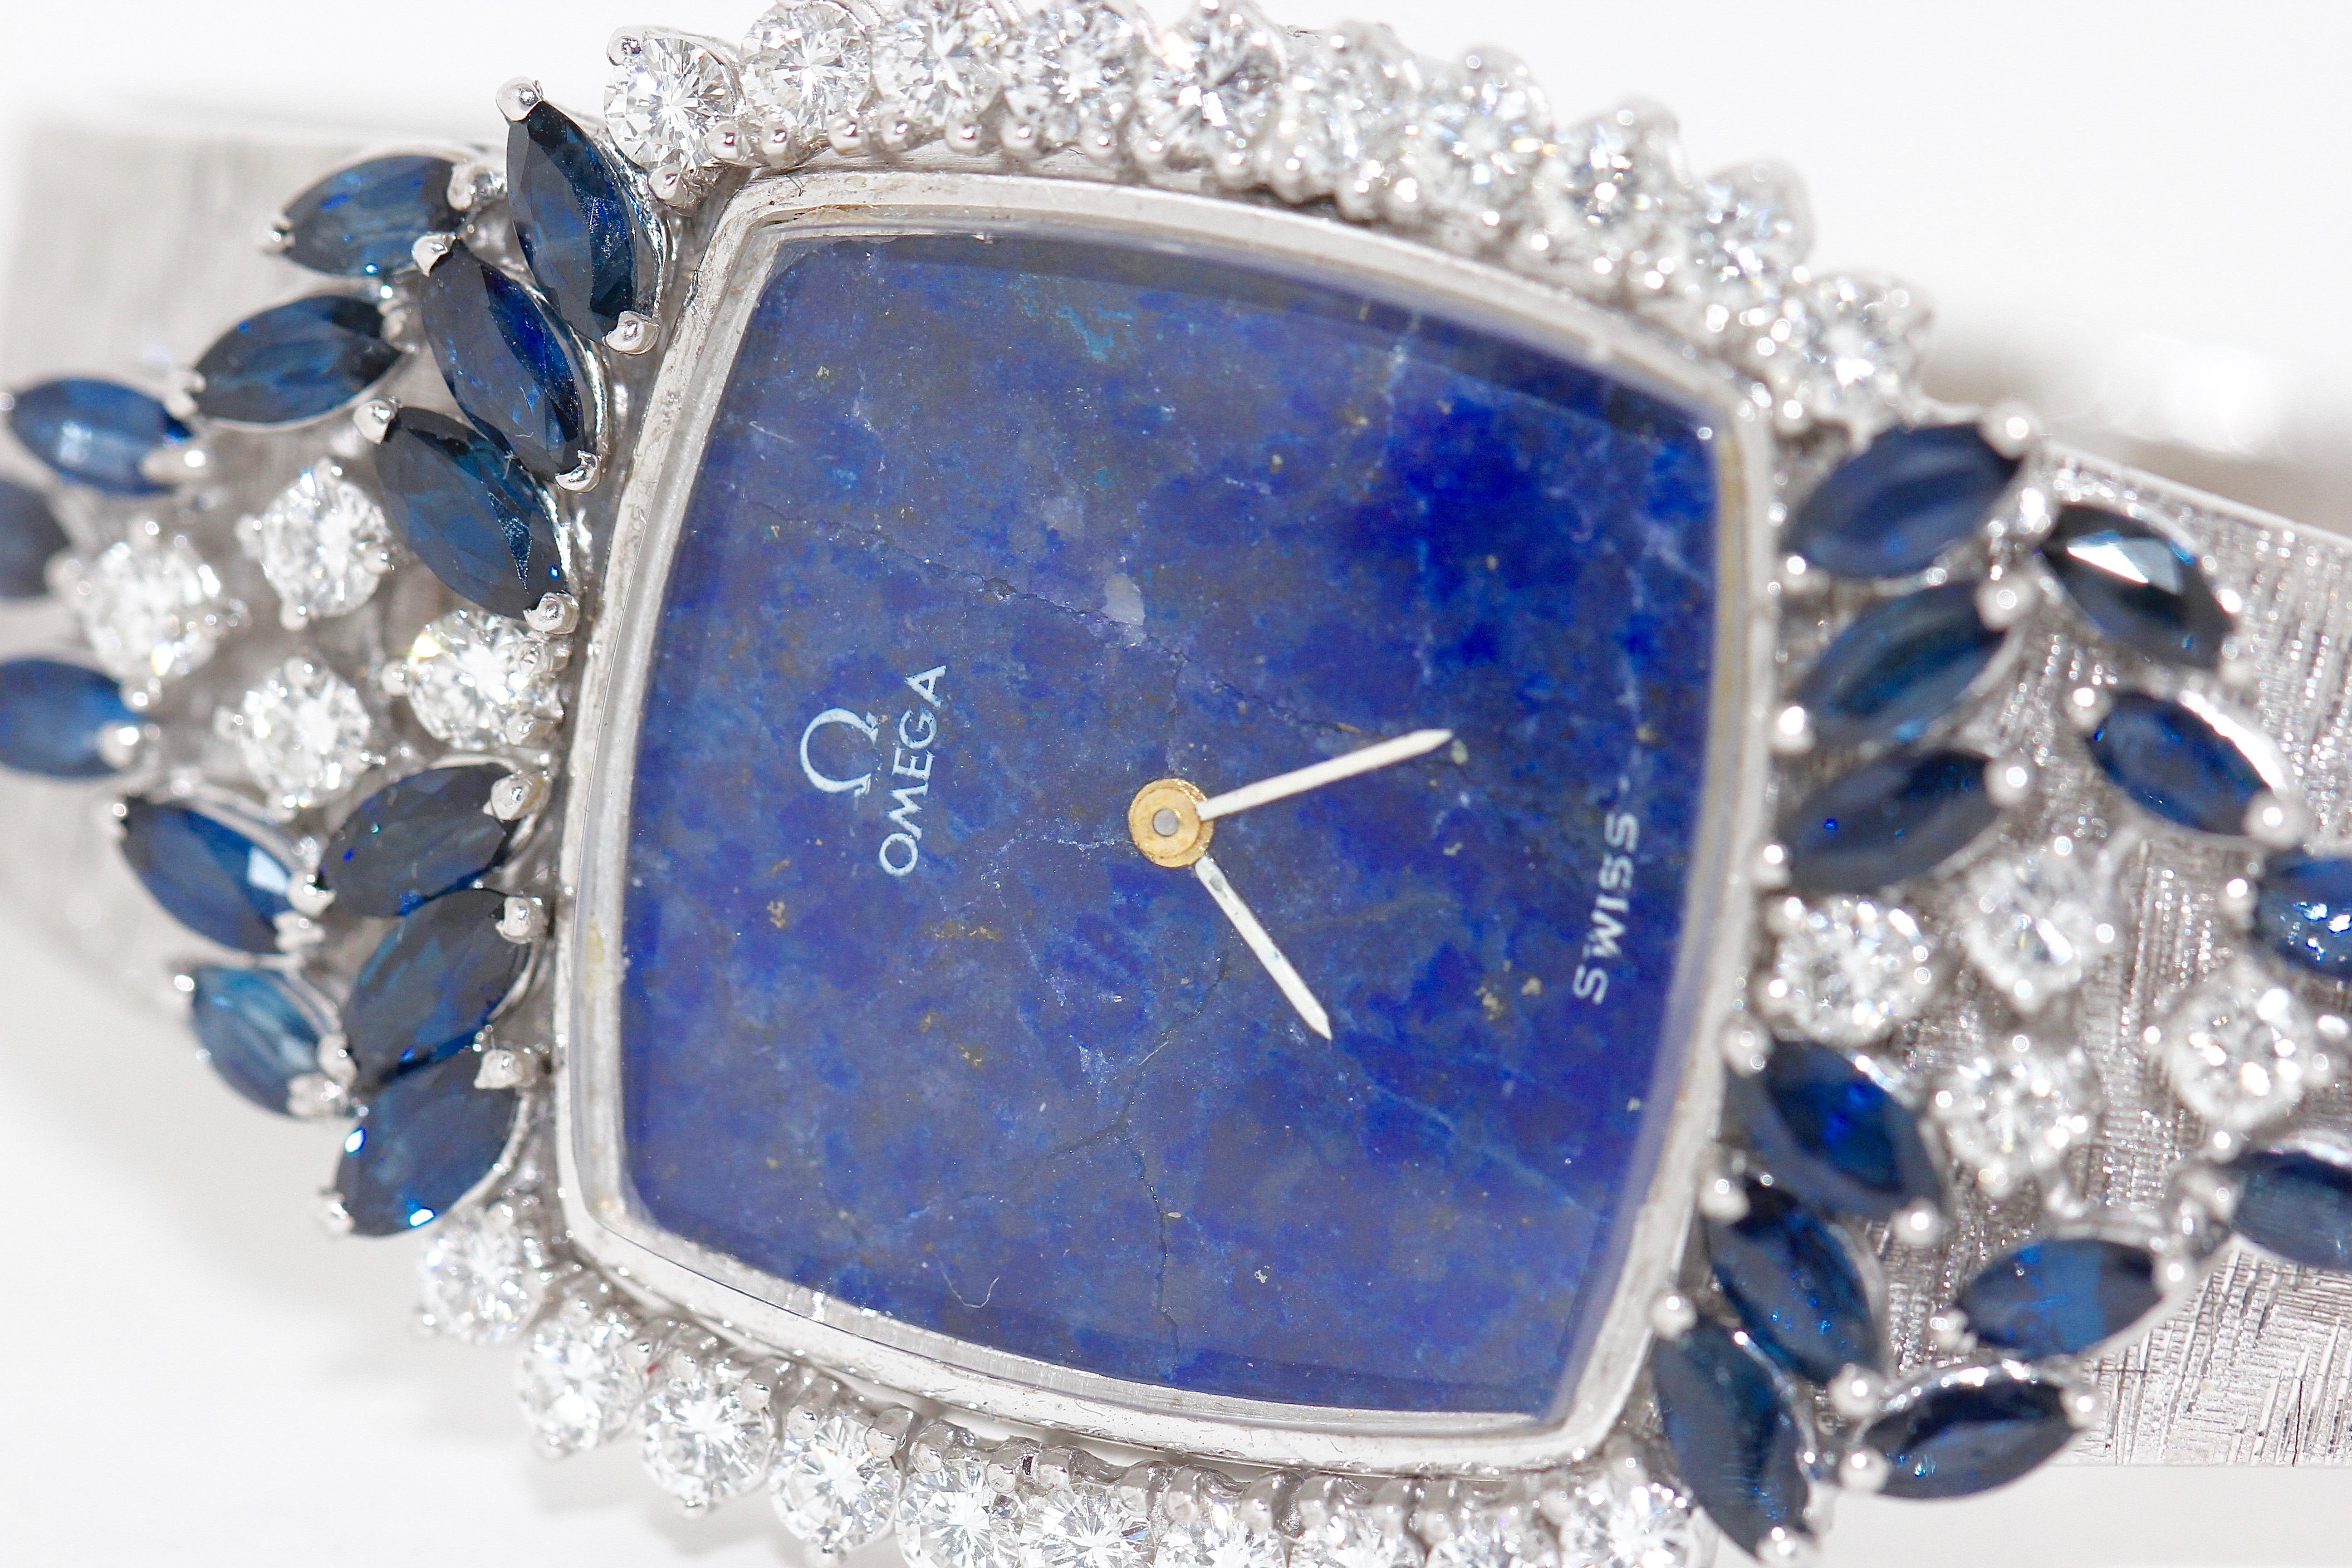 Beautiful and magnificent ladies watch from Omega. 18ct white gold set with brilliants and sapphires of top quality.
Mechanical hand-winding movement.

Unfortunately, the lapis lazuli dial is cracked. The cracks are only visible in the immediate